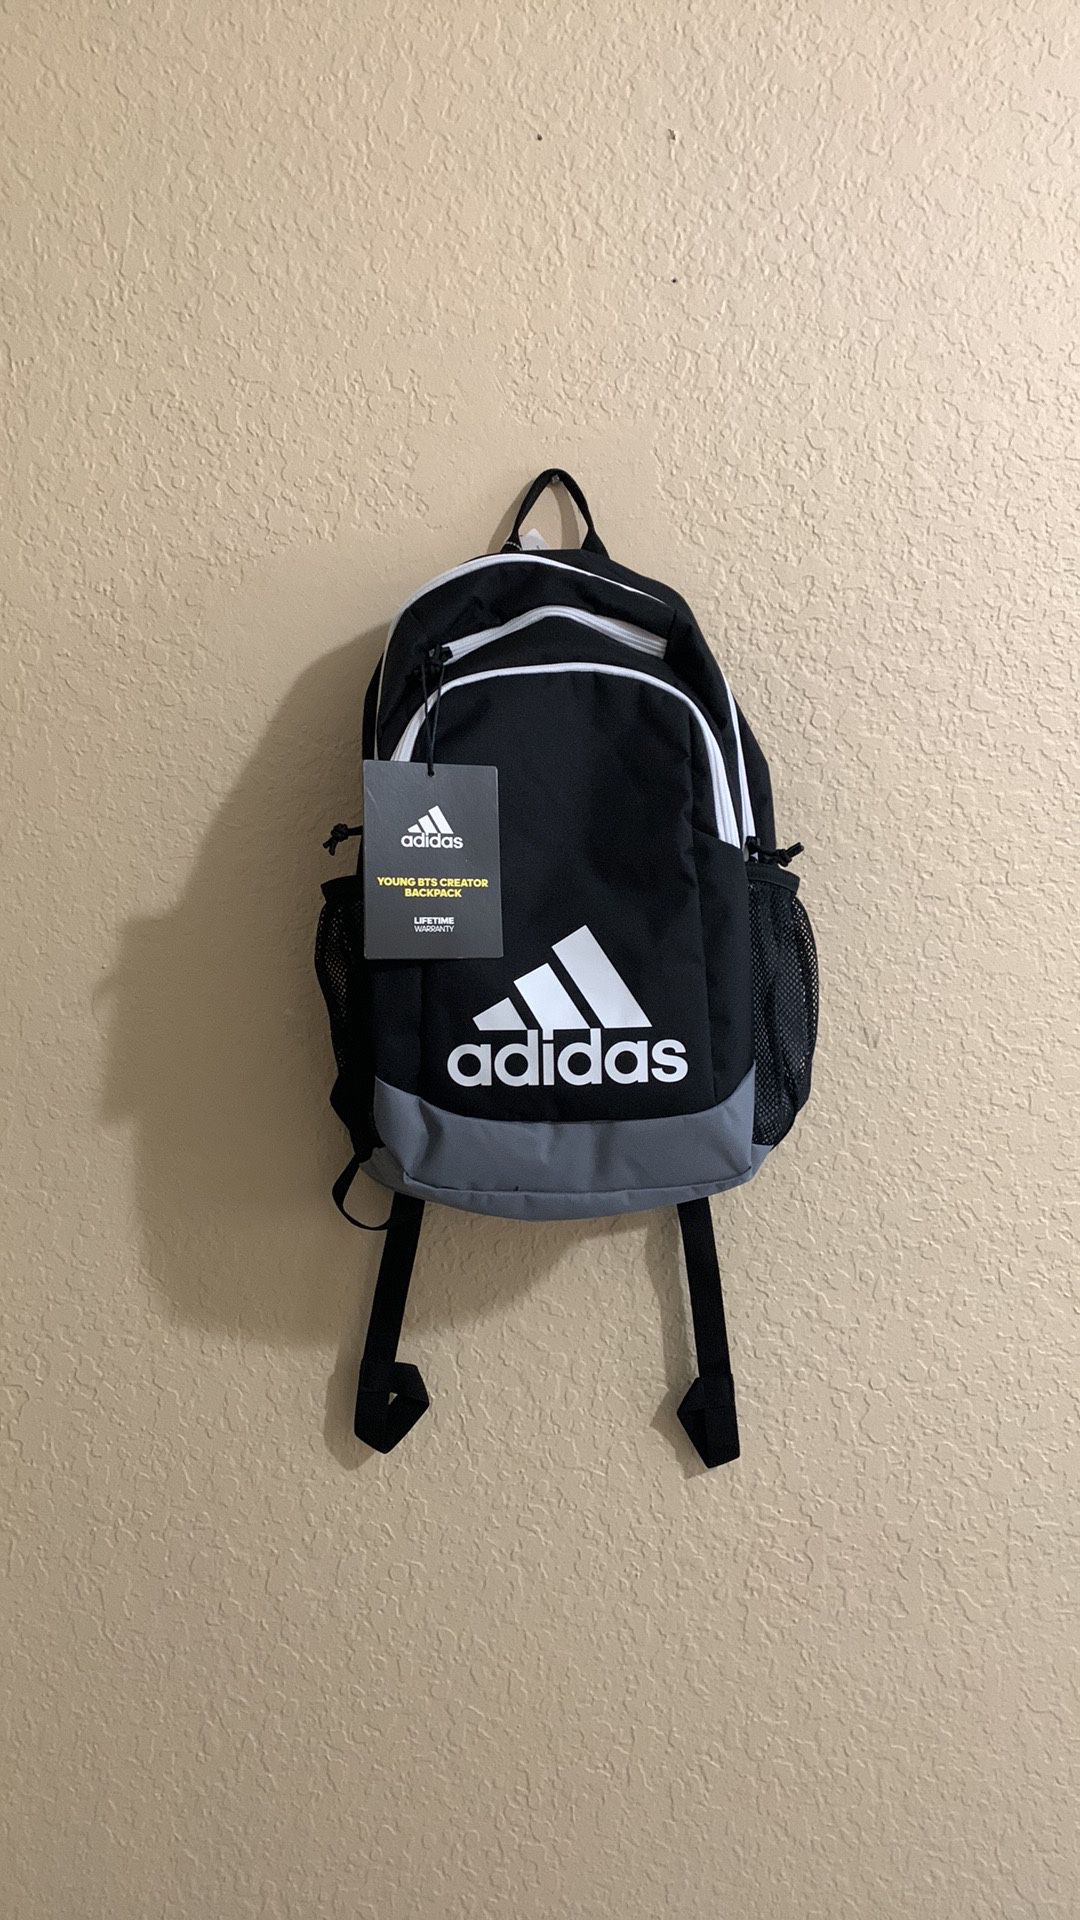 Adidas Kids Young Creator Backpack, Black and White, One Size